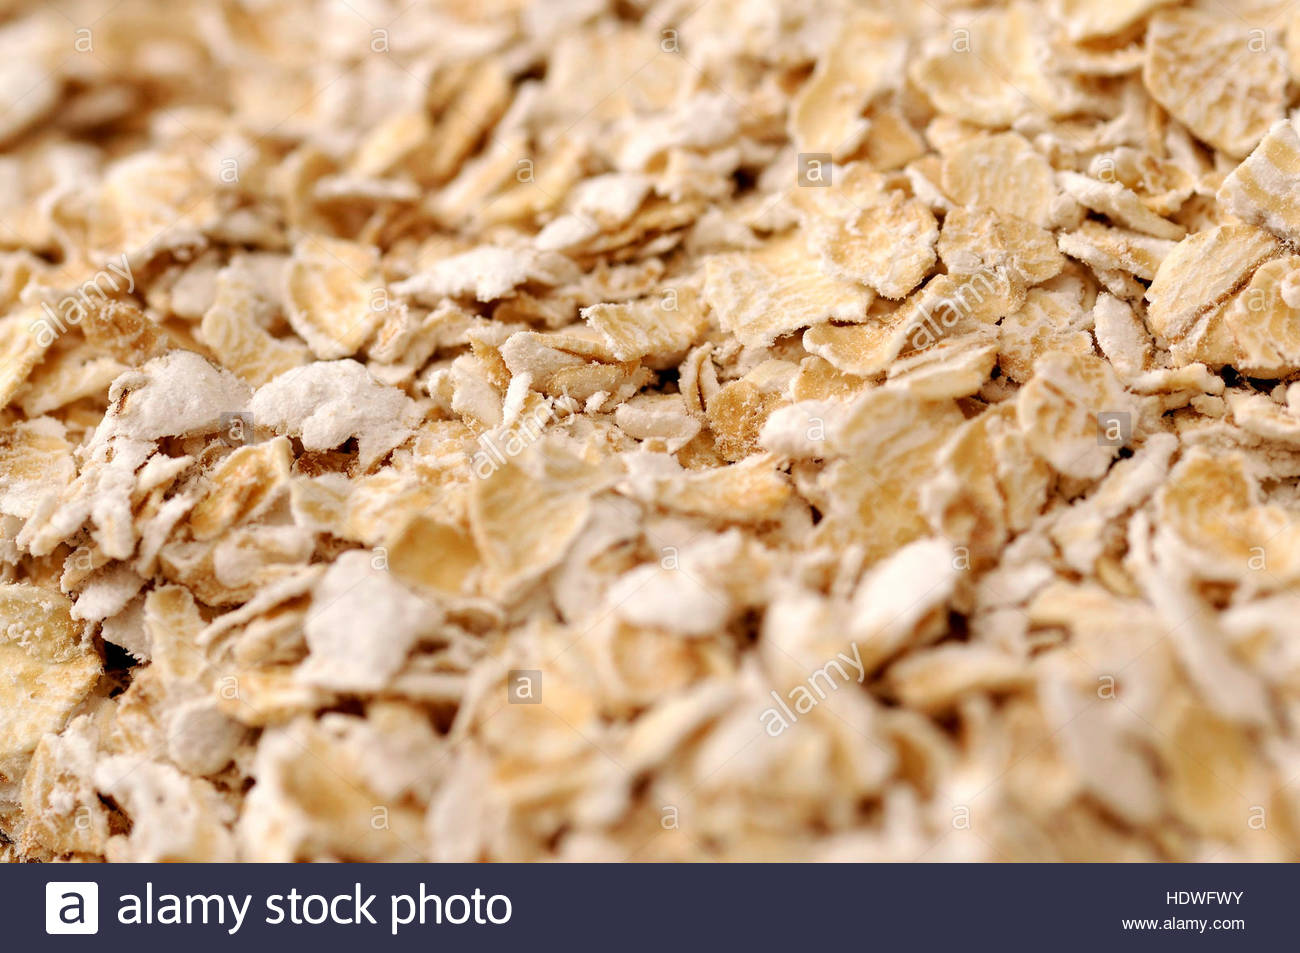 Oatmeal Background Good For Healthy Food Concept Stock Photo